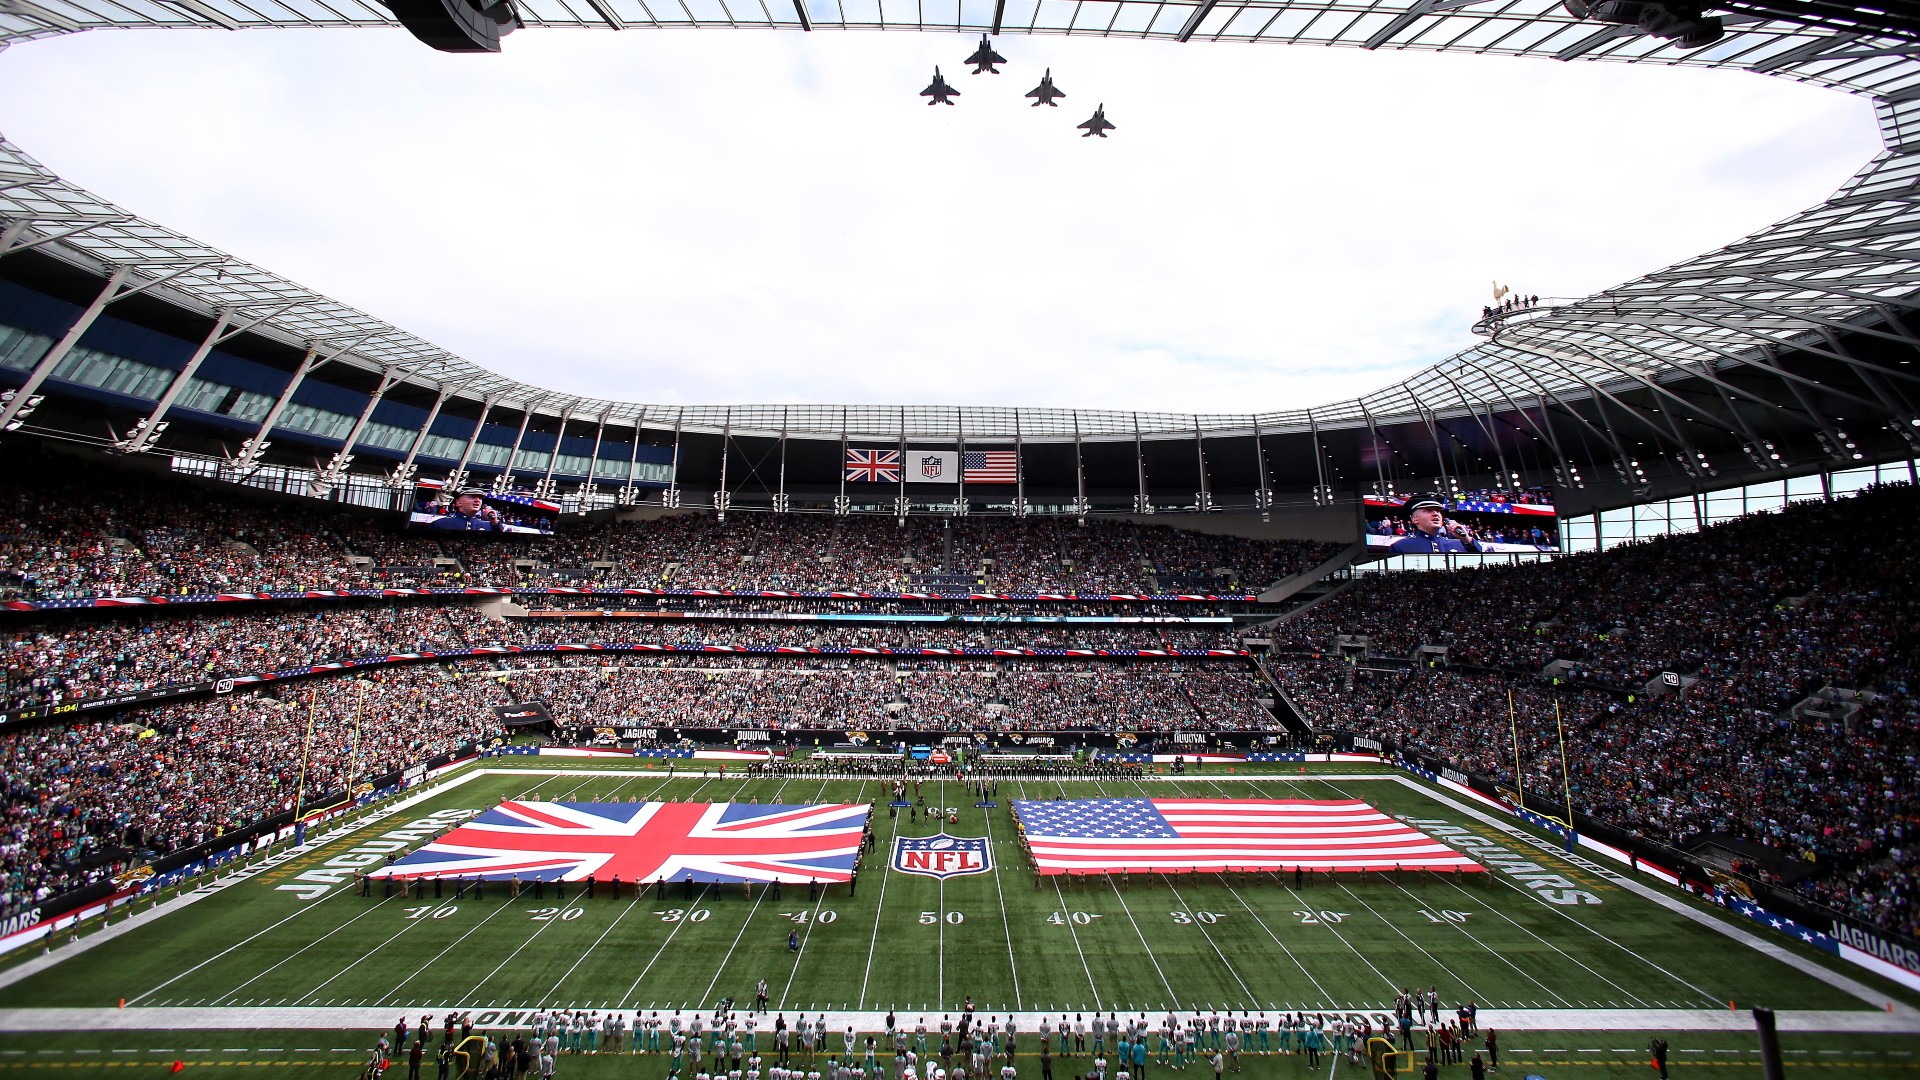 nfl london games prices